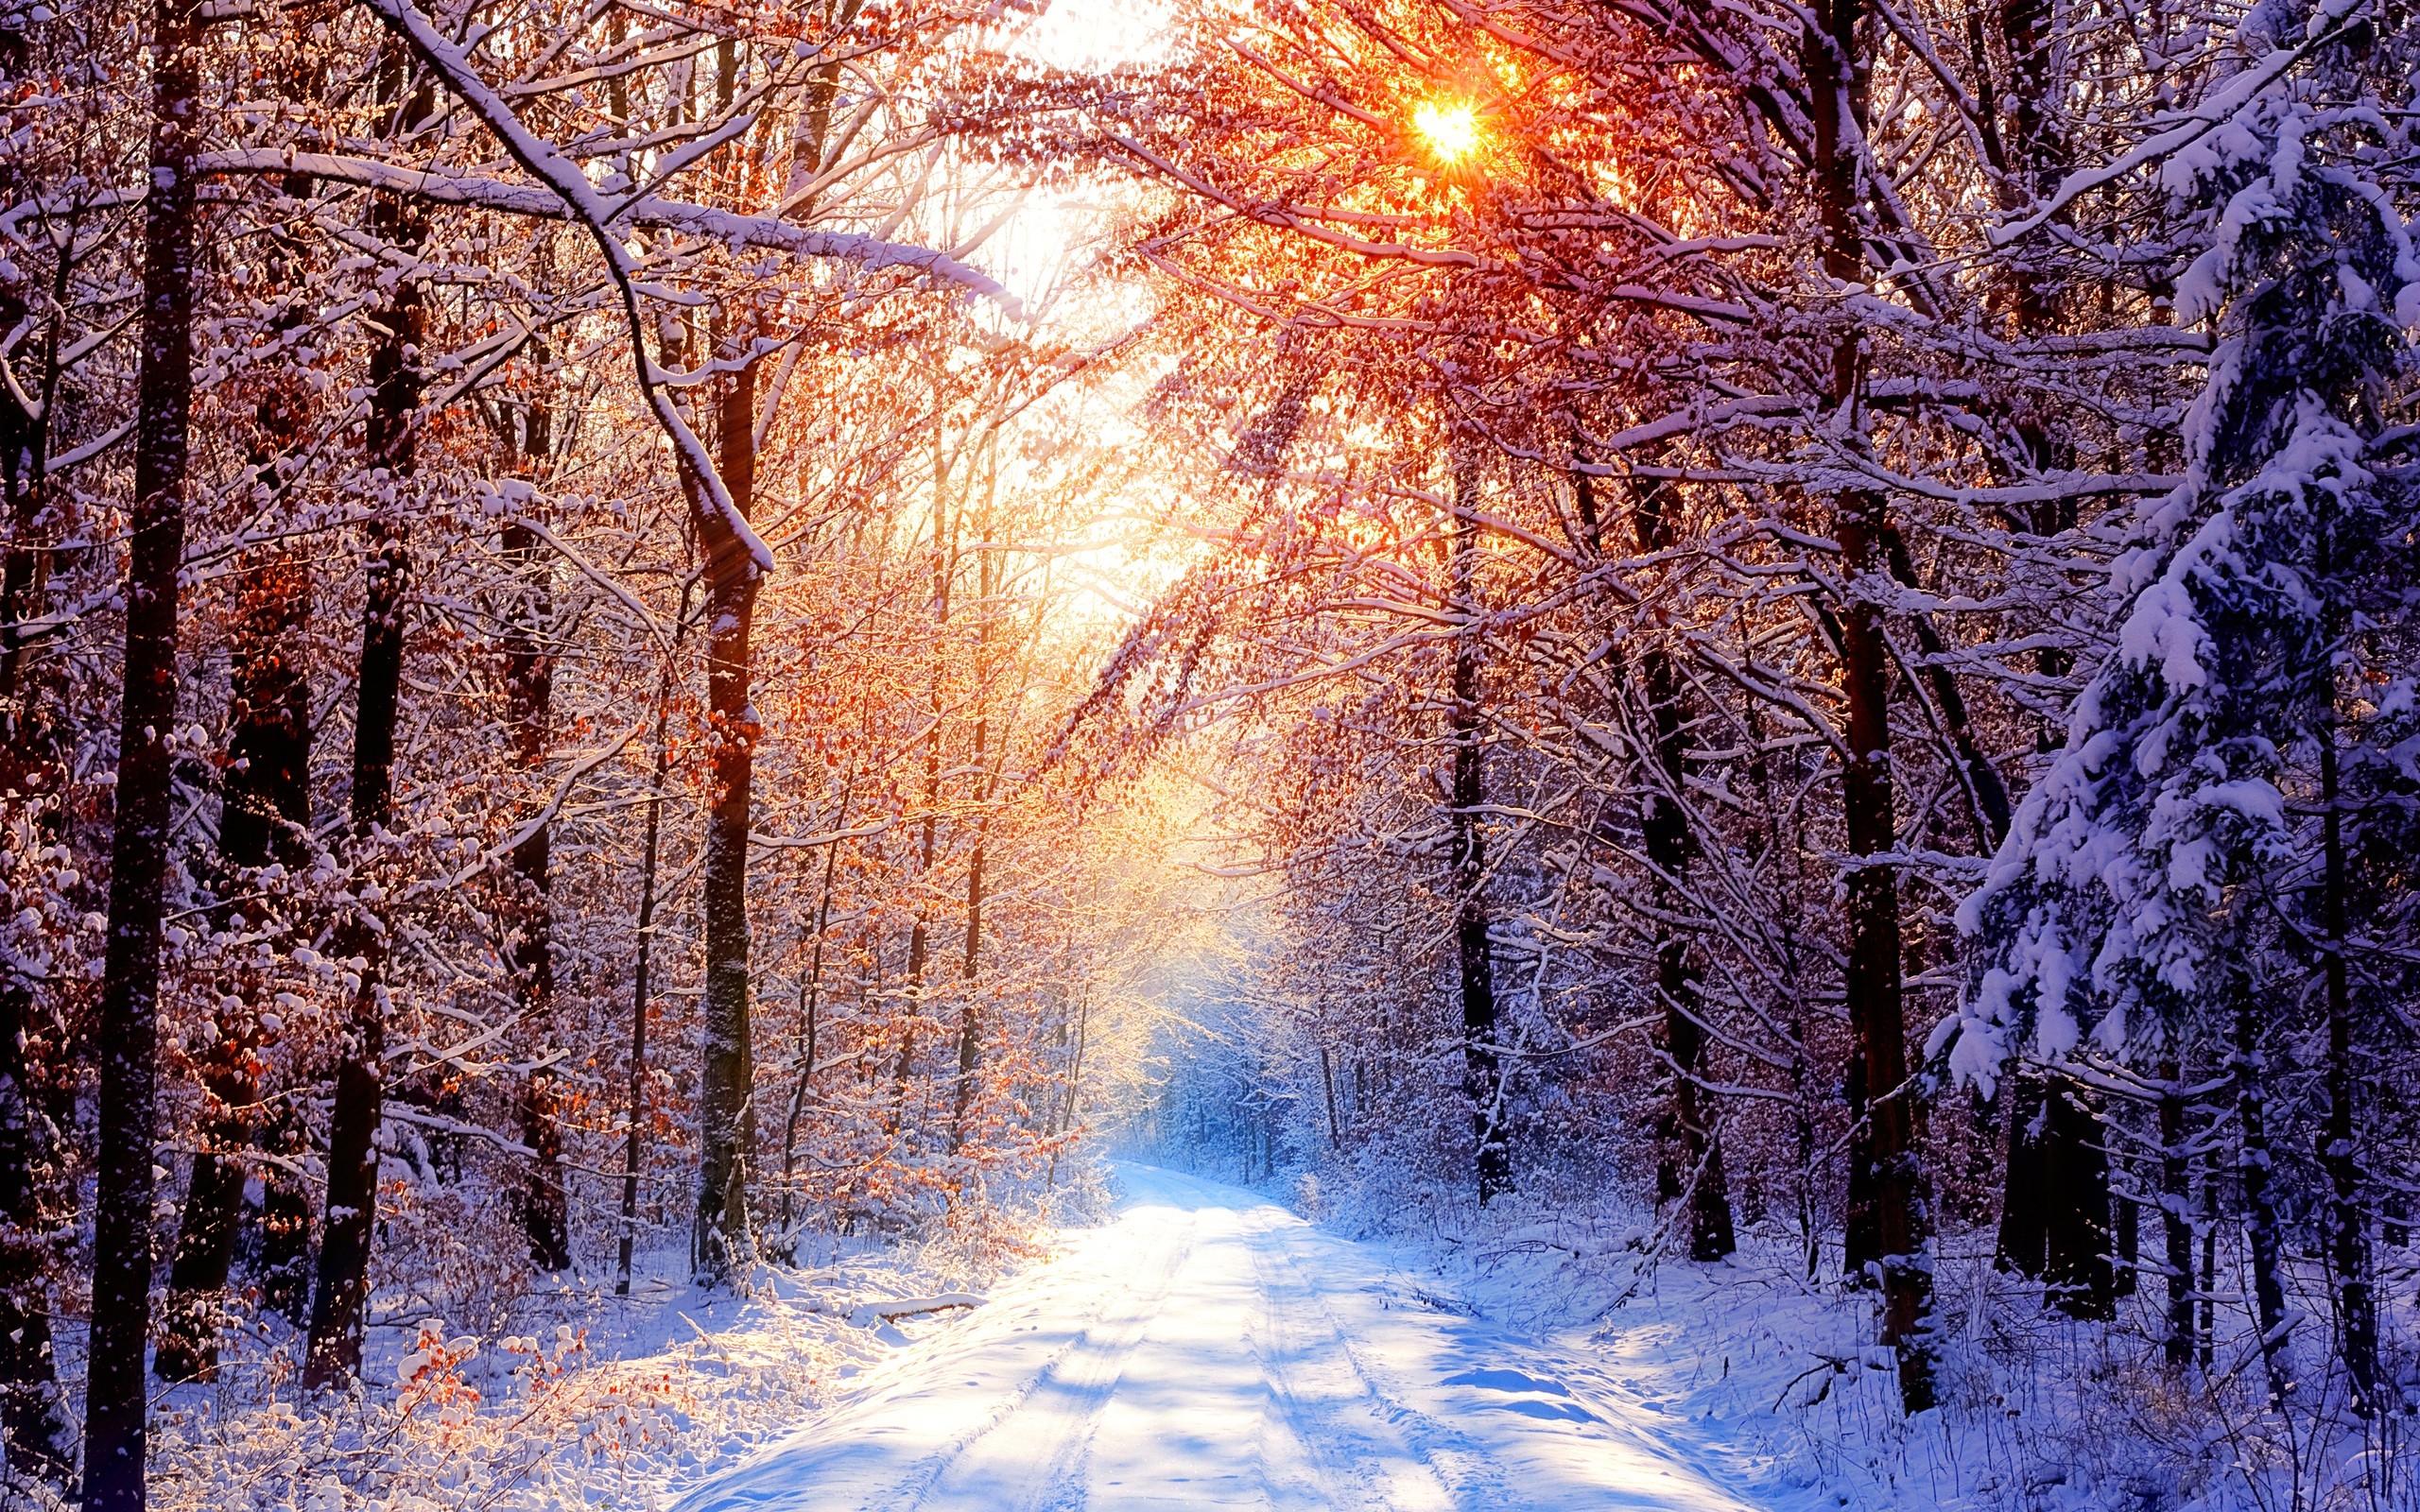 General 2560x1600 nature landscape forest snow winter road sunlight trees